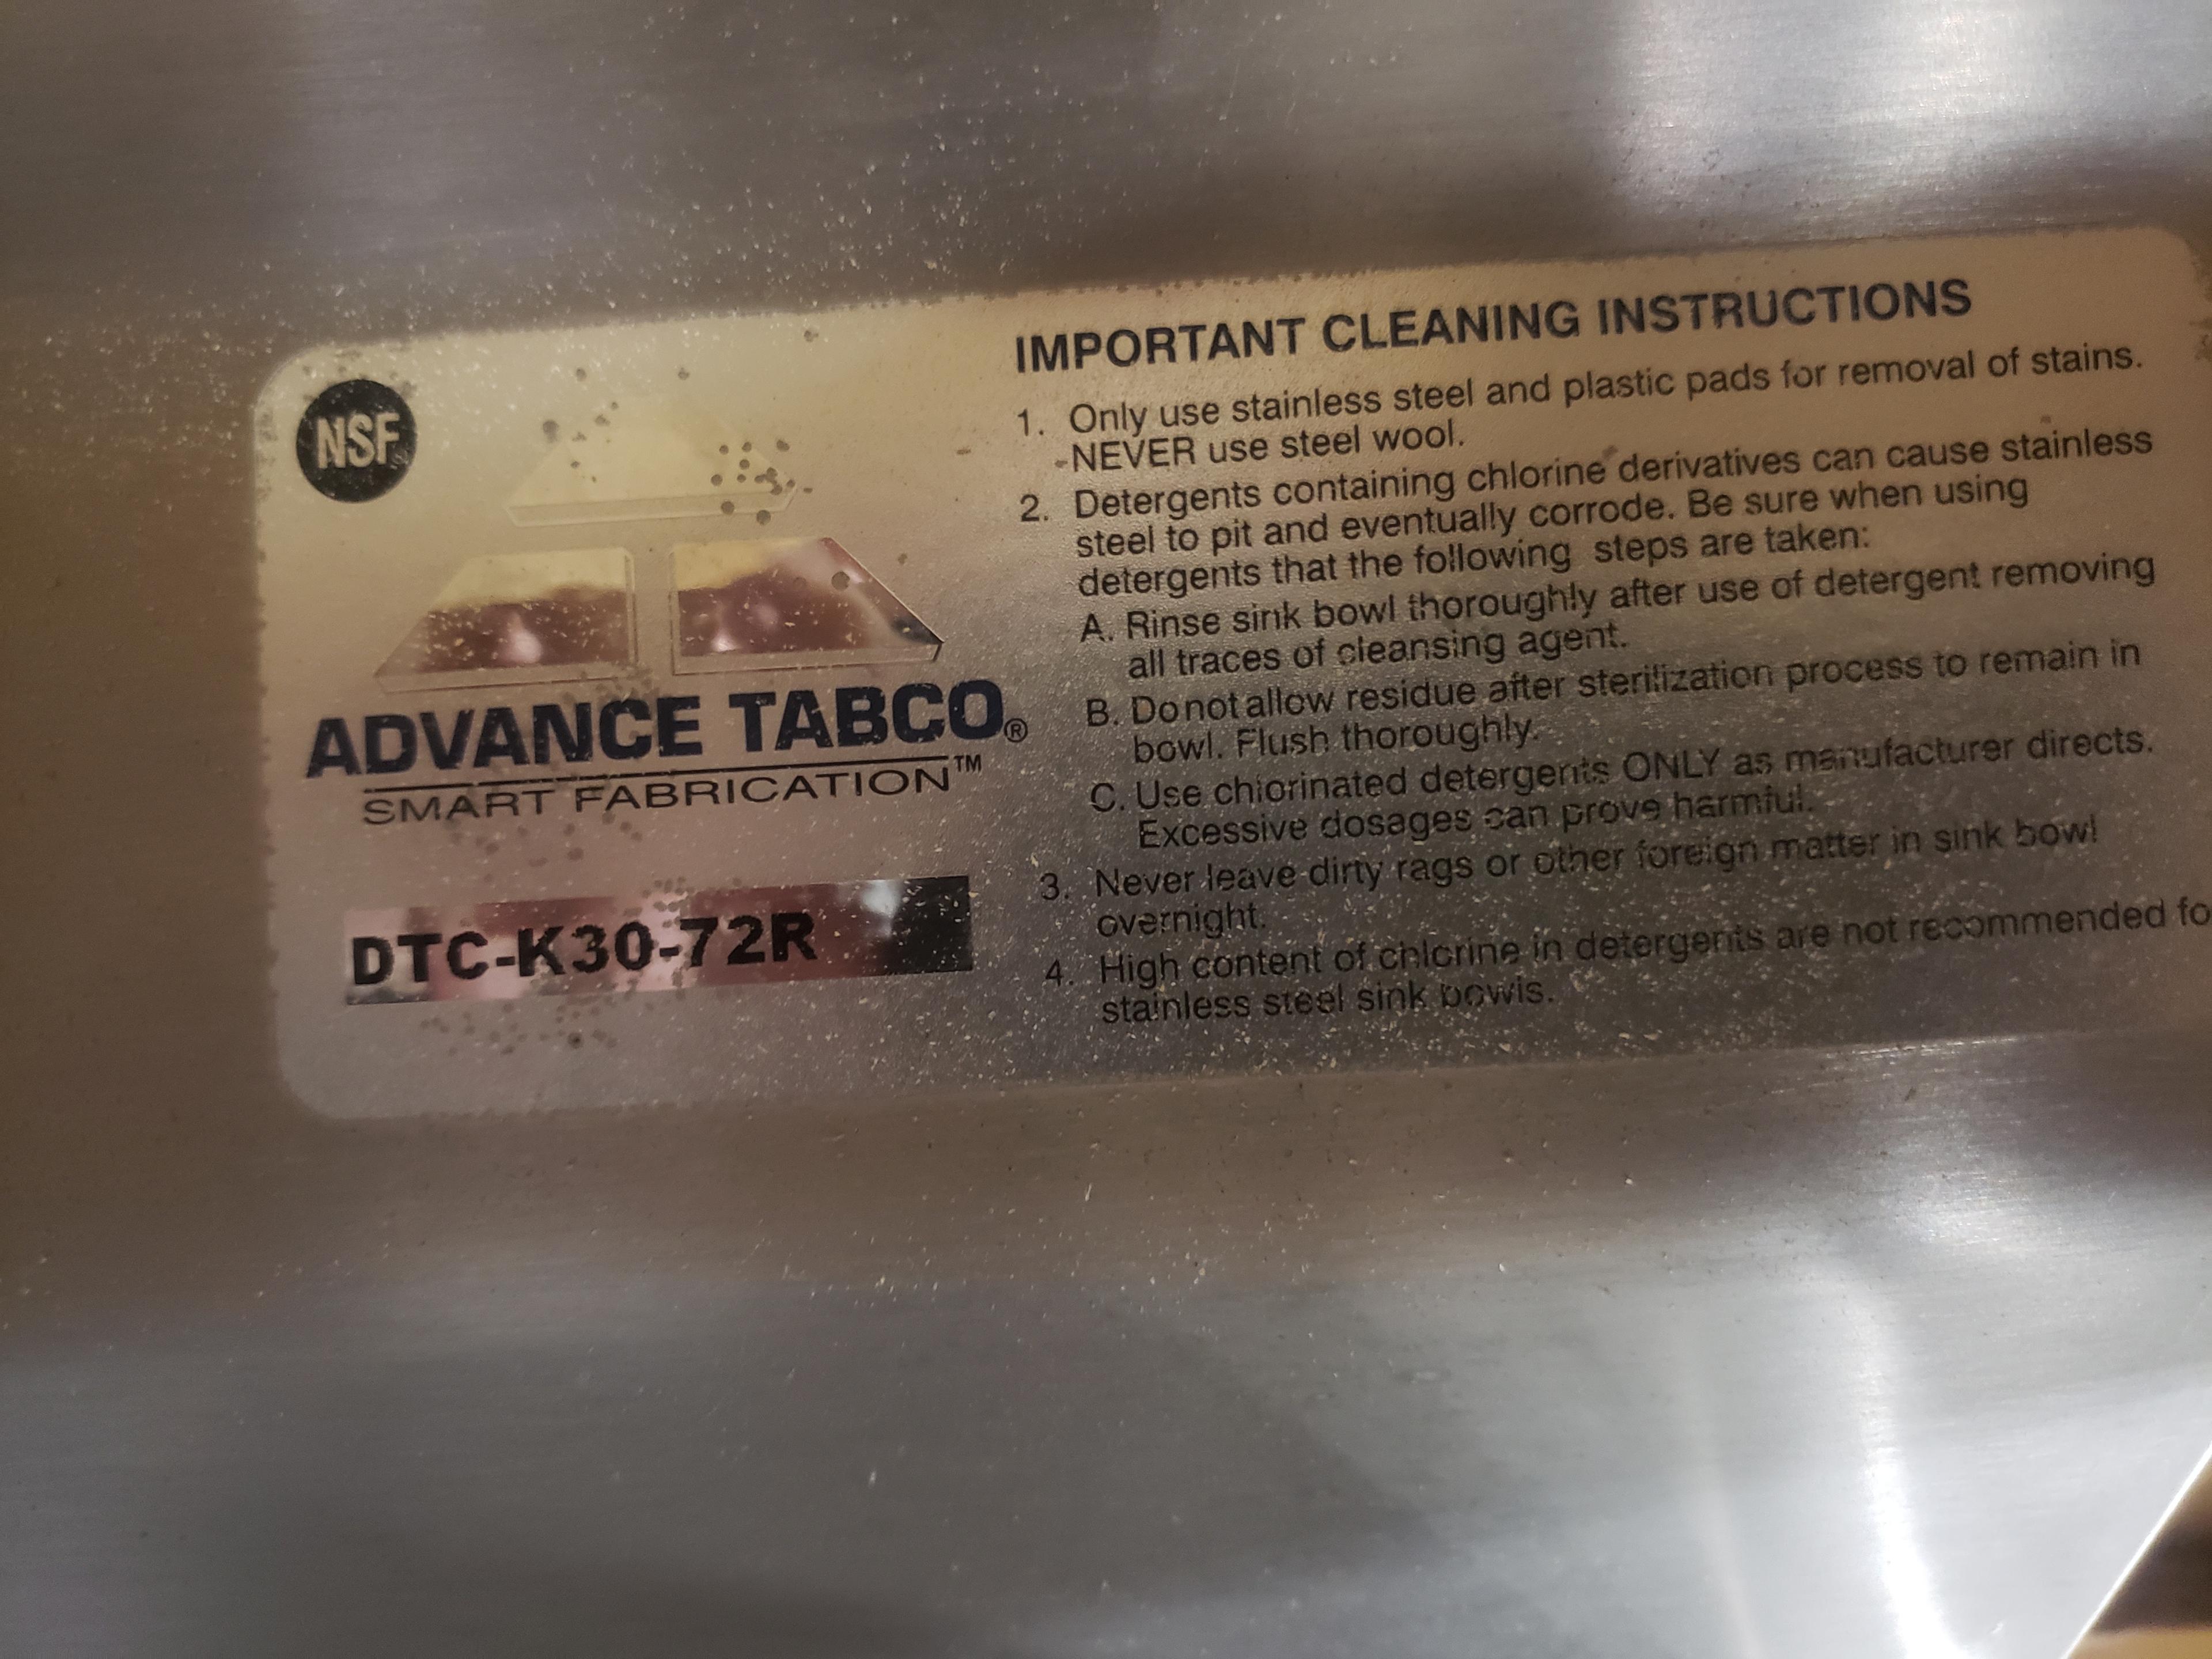 Advance Tabco Stainless Steel Dishwasher Outfeed Table, m/n DTC-K30-72R (New in Crate)